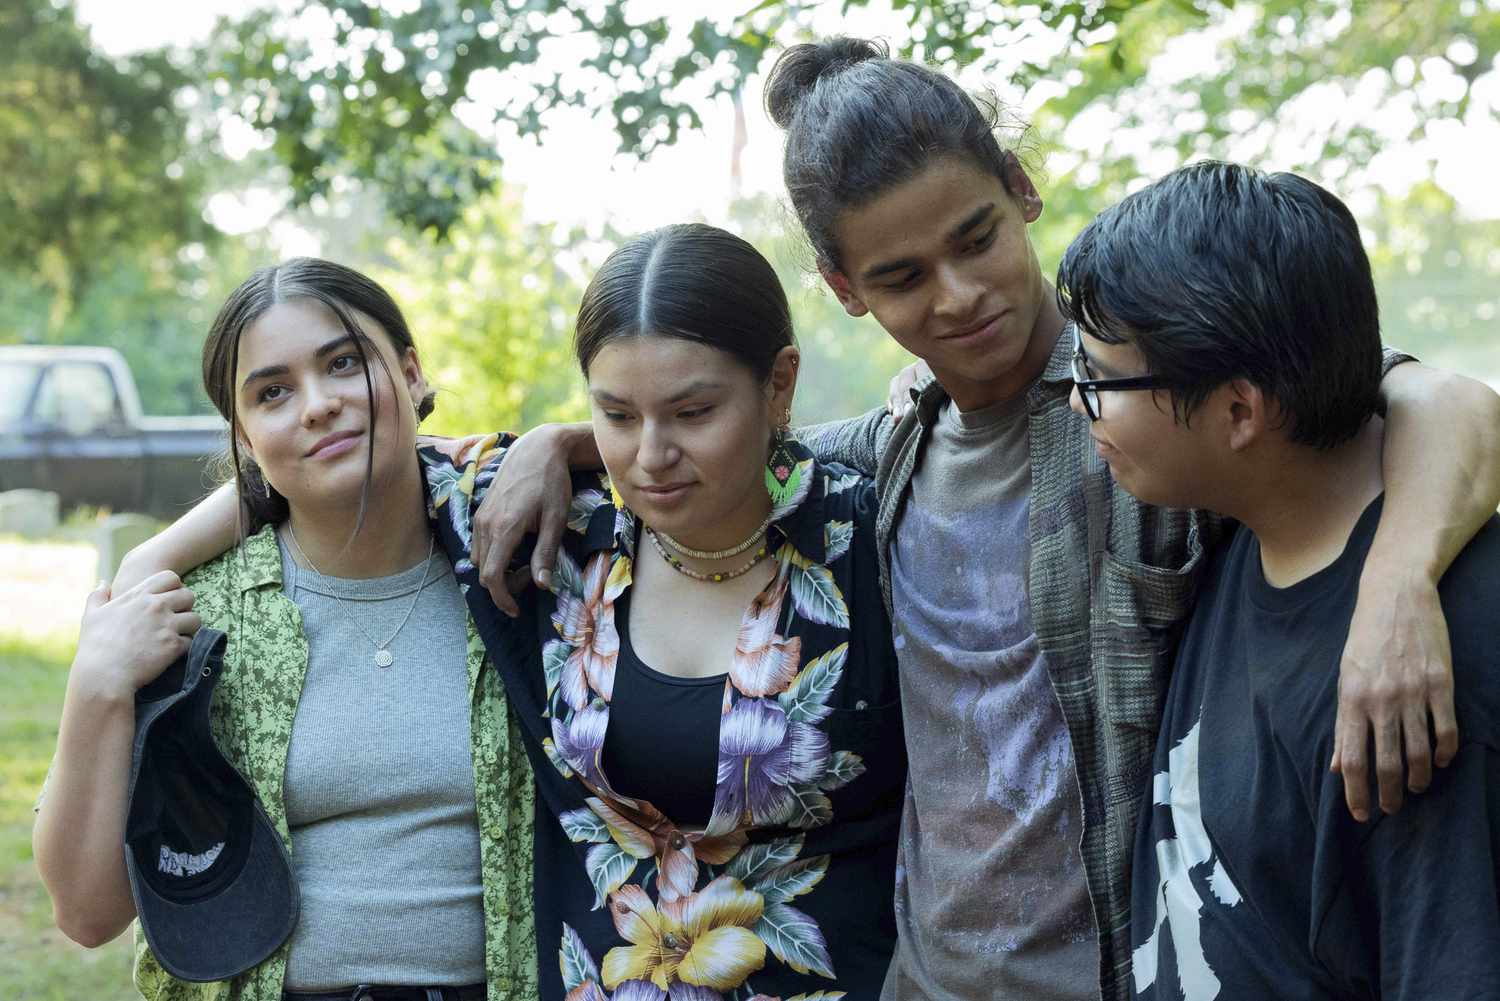 'Reservation Dogs' star Devery Jacobs, Emmy nomination predictions, and more in EW's 'The Awardist'